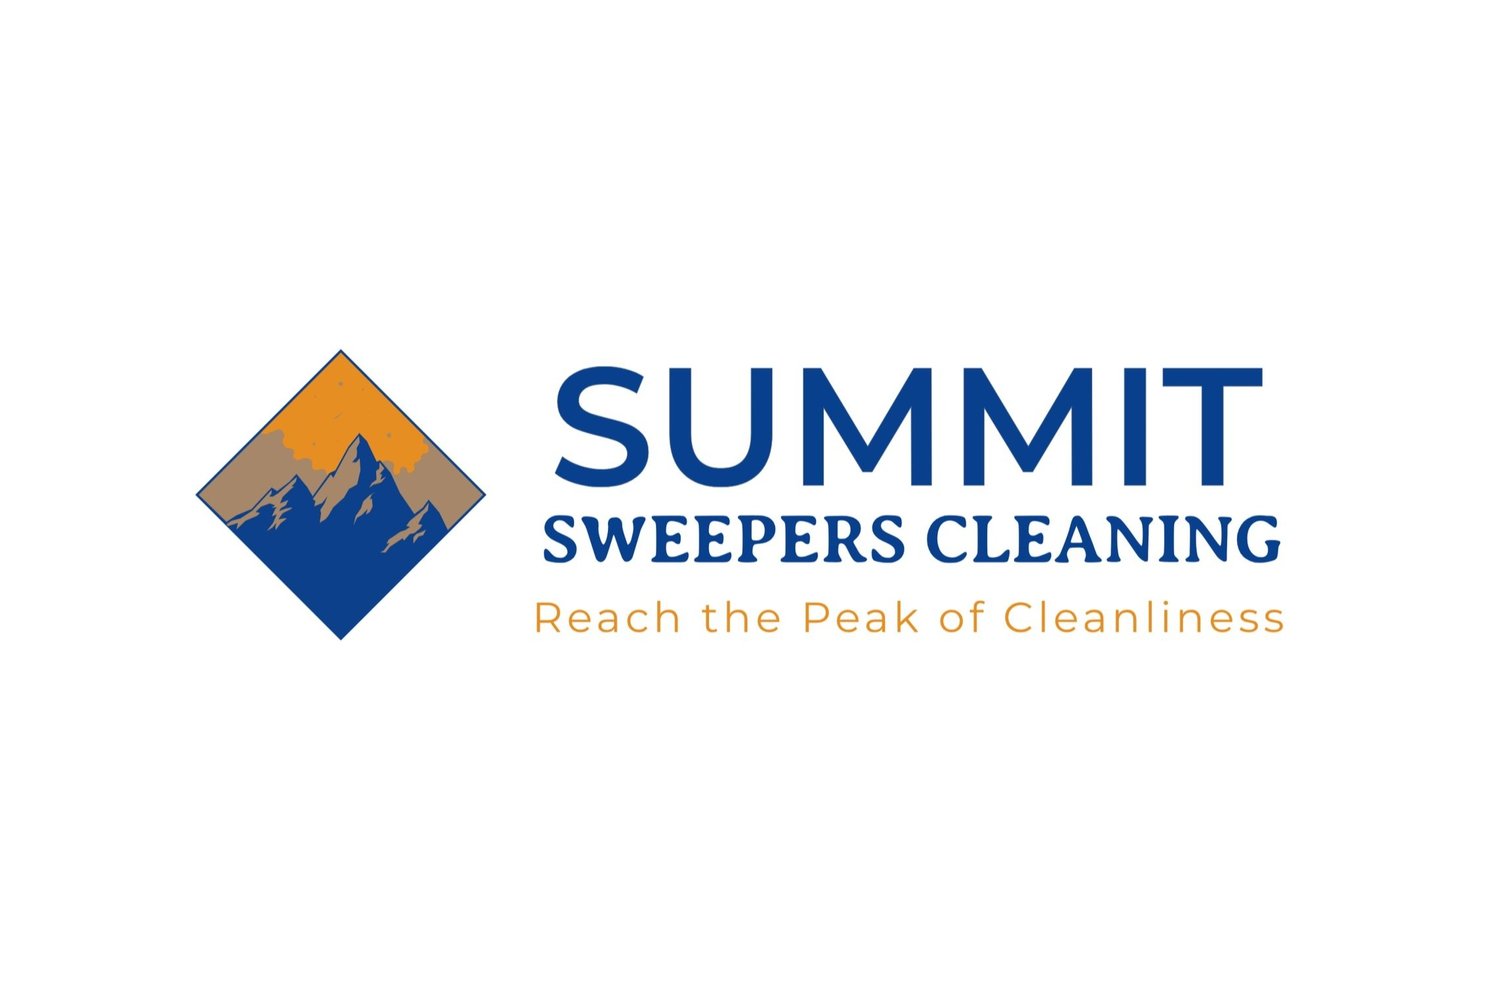 Summit Sweepers Cleaning